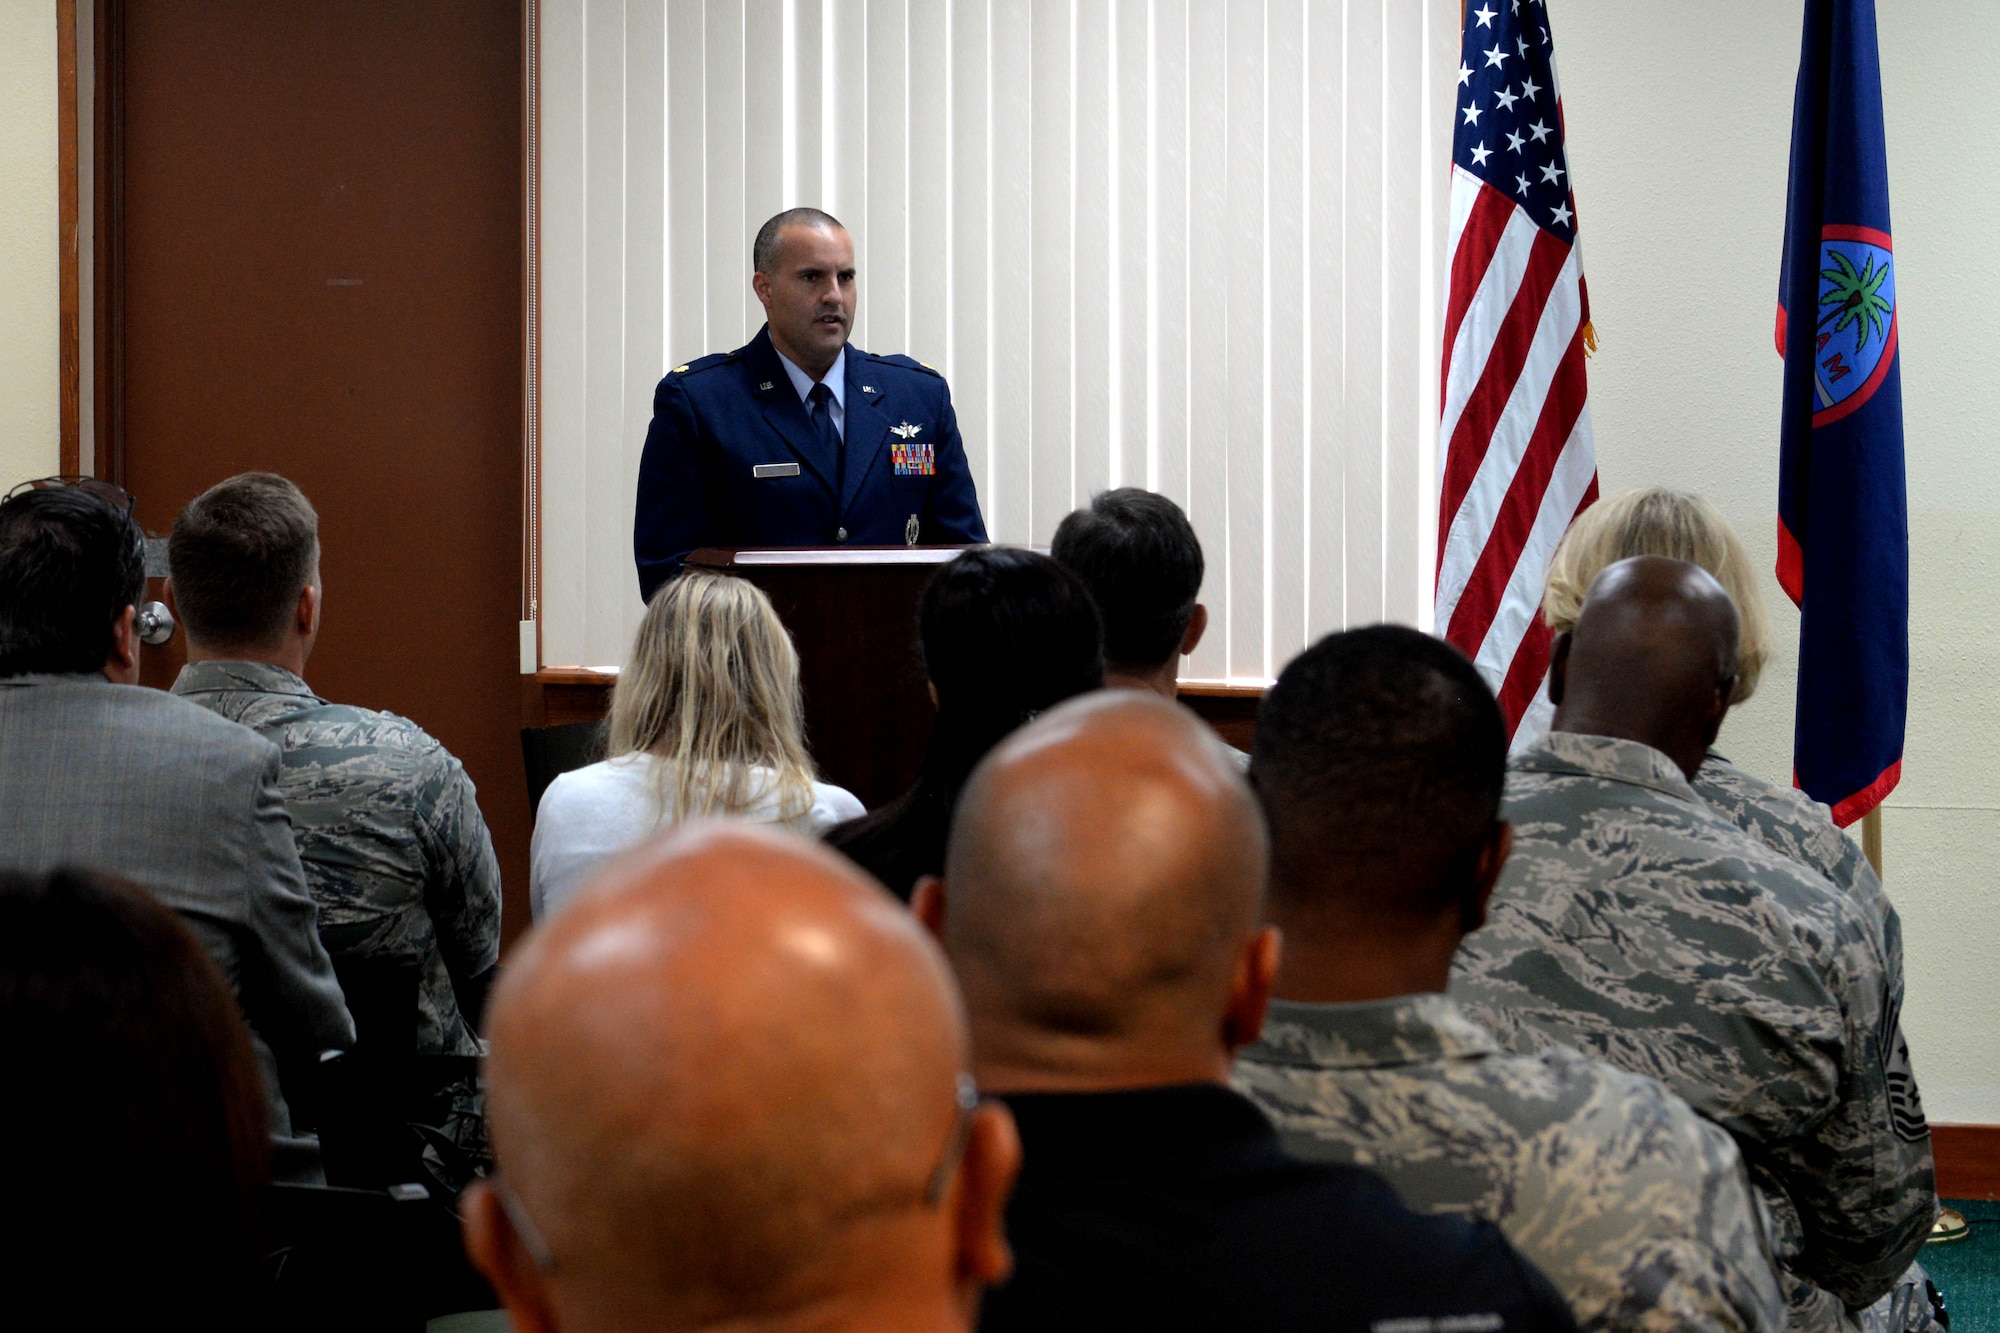 Maj. Christopher Butler, 21st Space Operations Squadron Detachment 2 commander, speaks to an audience Sept. 17, 2015 at Northwest Field on Andersen Air Force Base, Guam. The 21st SOPS Det 2 celebrated their 50th anniversary with a ceremony here Sept. 17, 2015. (U.S. Air Force photo by Airman 1st Class Alexa Ann Henderson/Released)